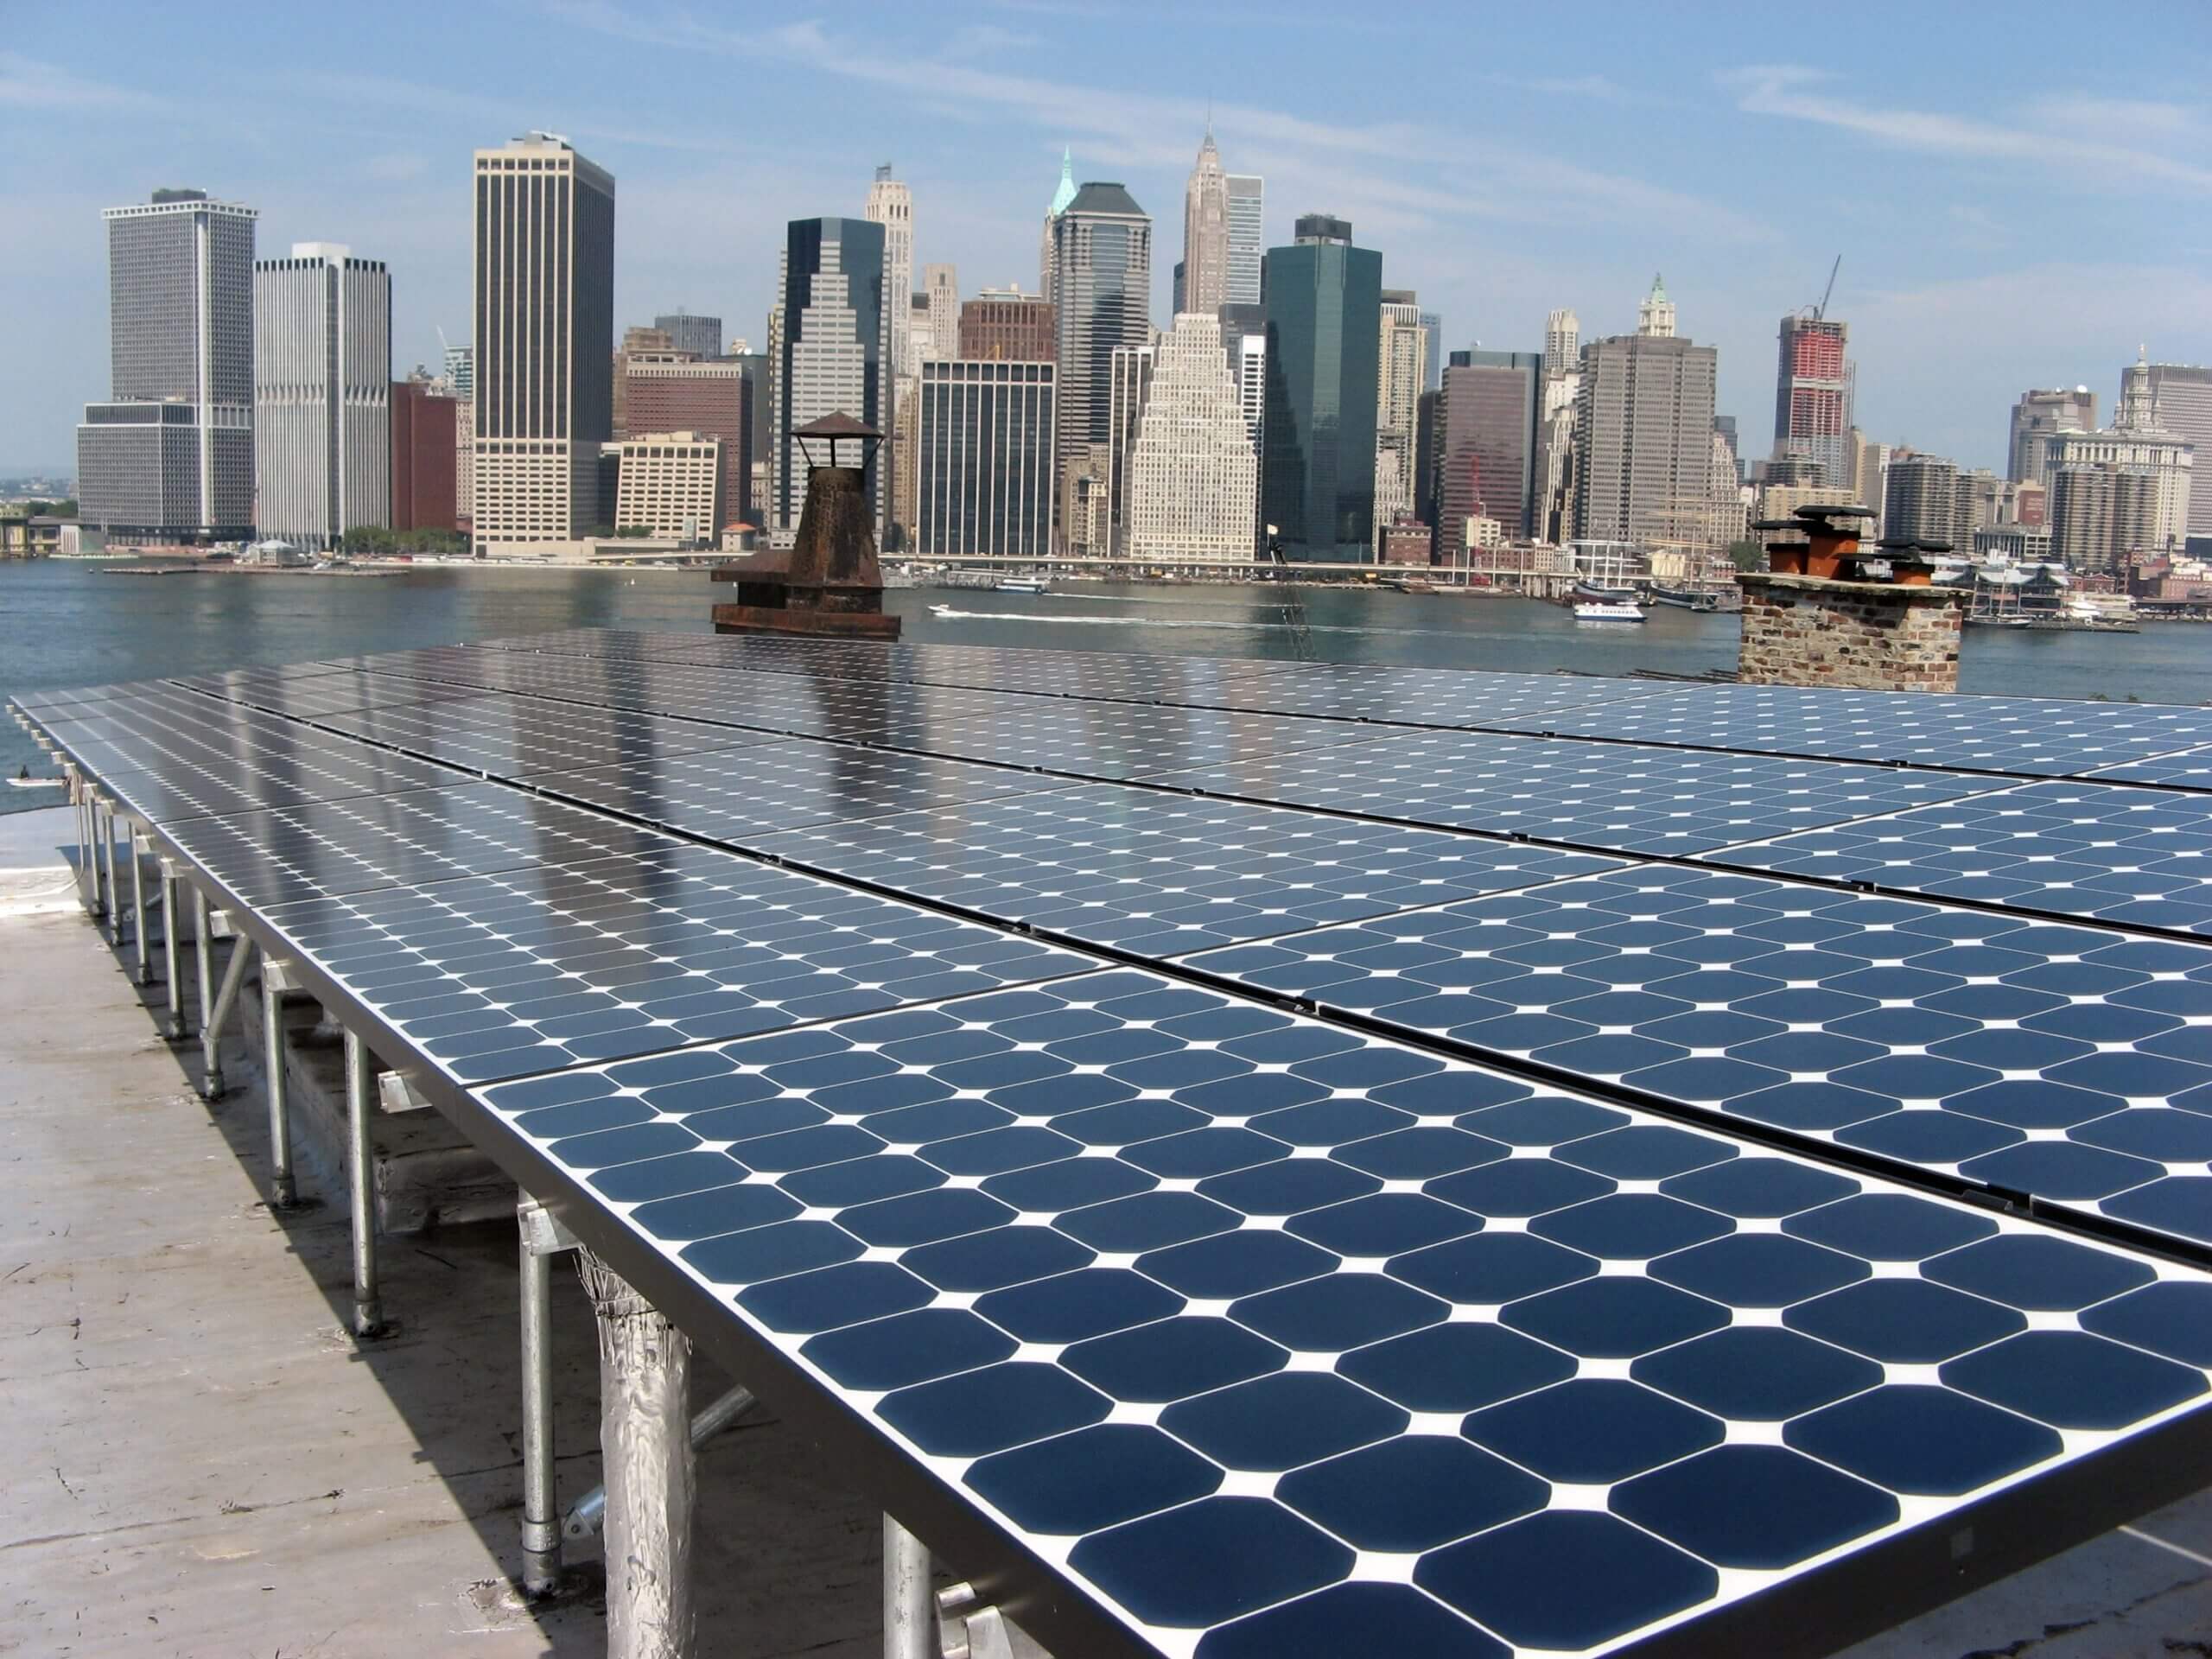 Solar Energy Systems installed this solar PV rooftop system in New York City.